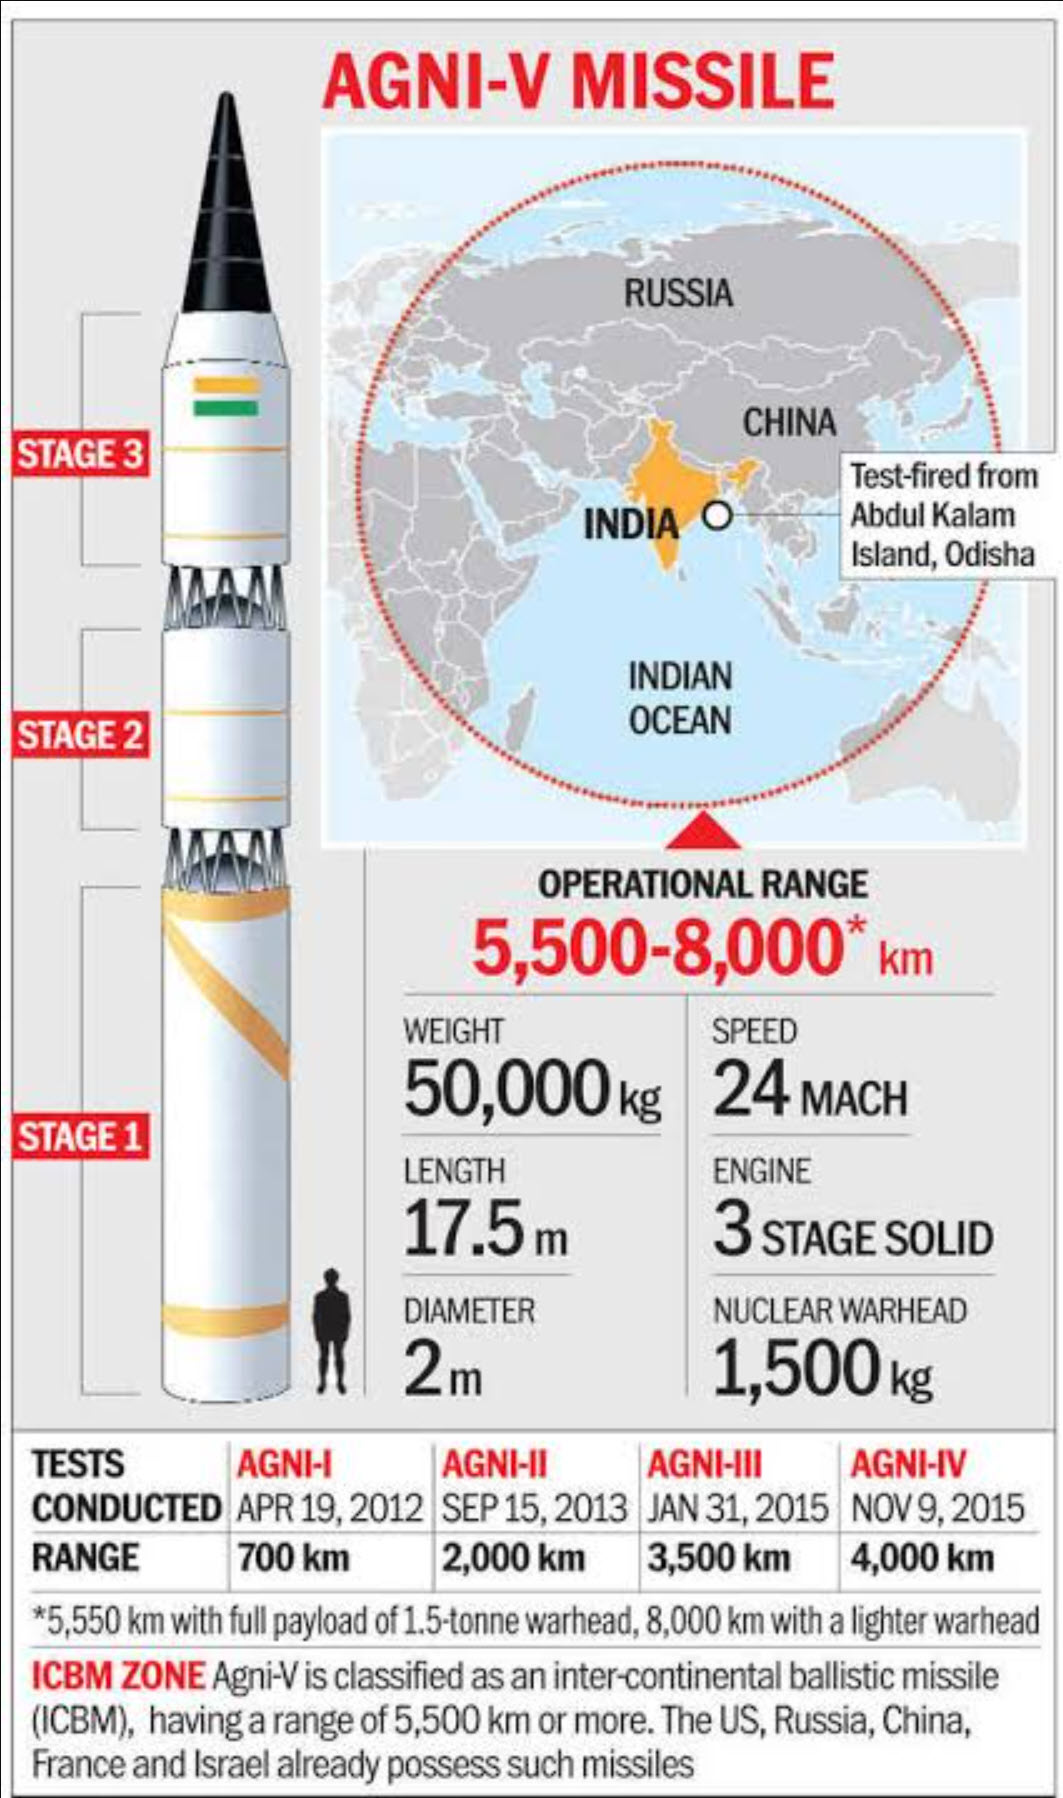 WAR -  China Massing Troops Along India Border, India Says Responding in-kind with "large deployments" India-Nuke-Missile-Range